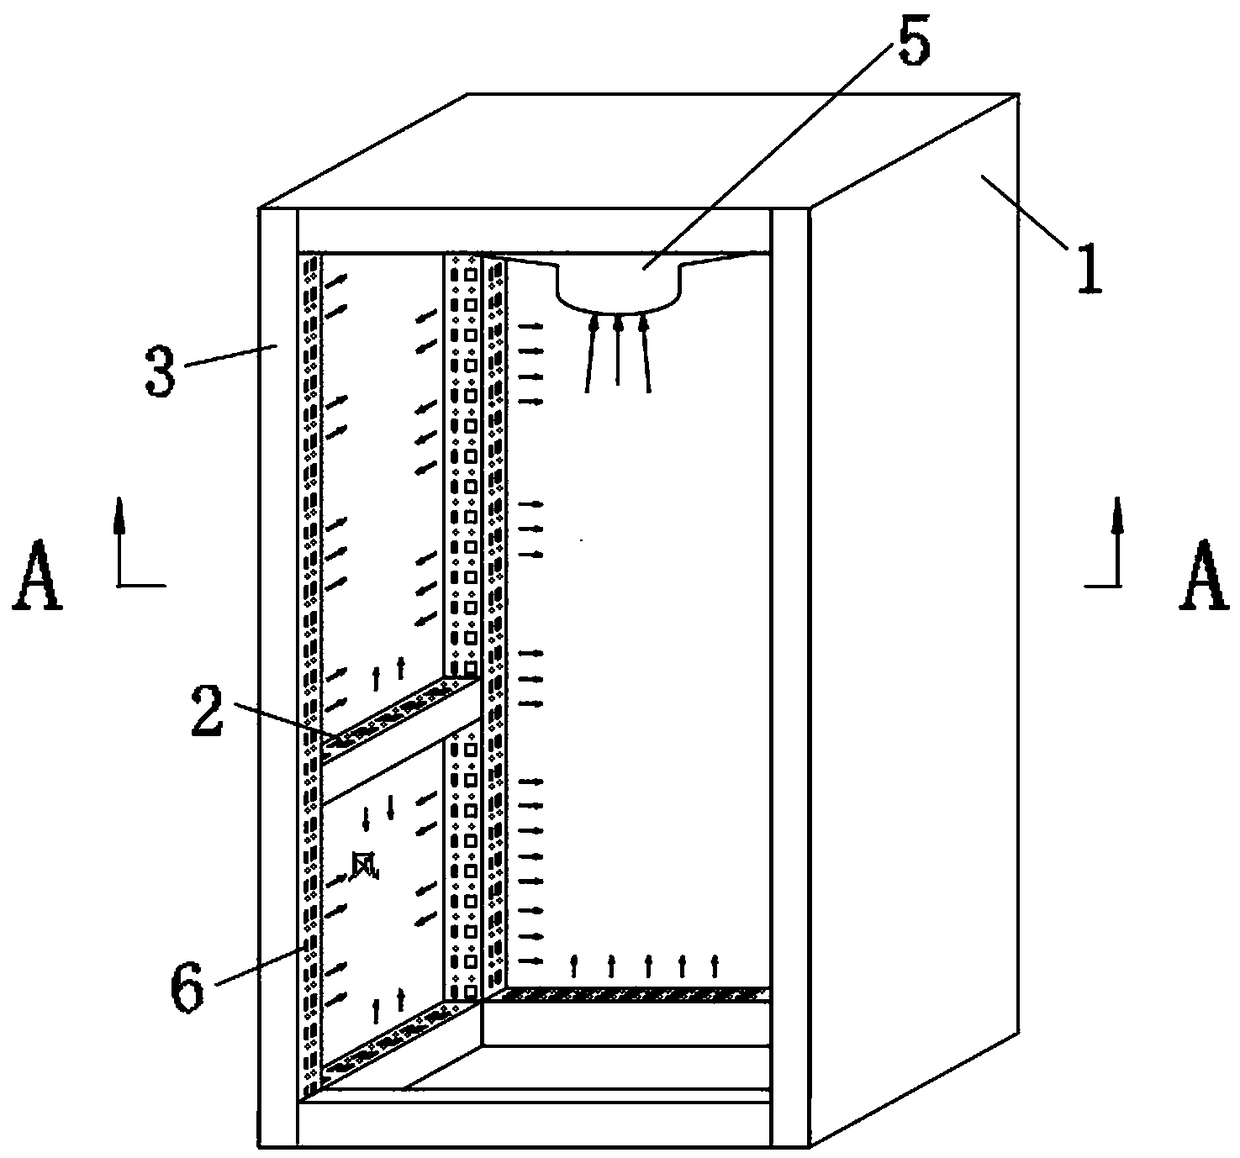 An electrical cabinet with an airflow circulation device